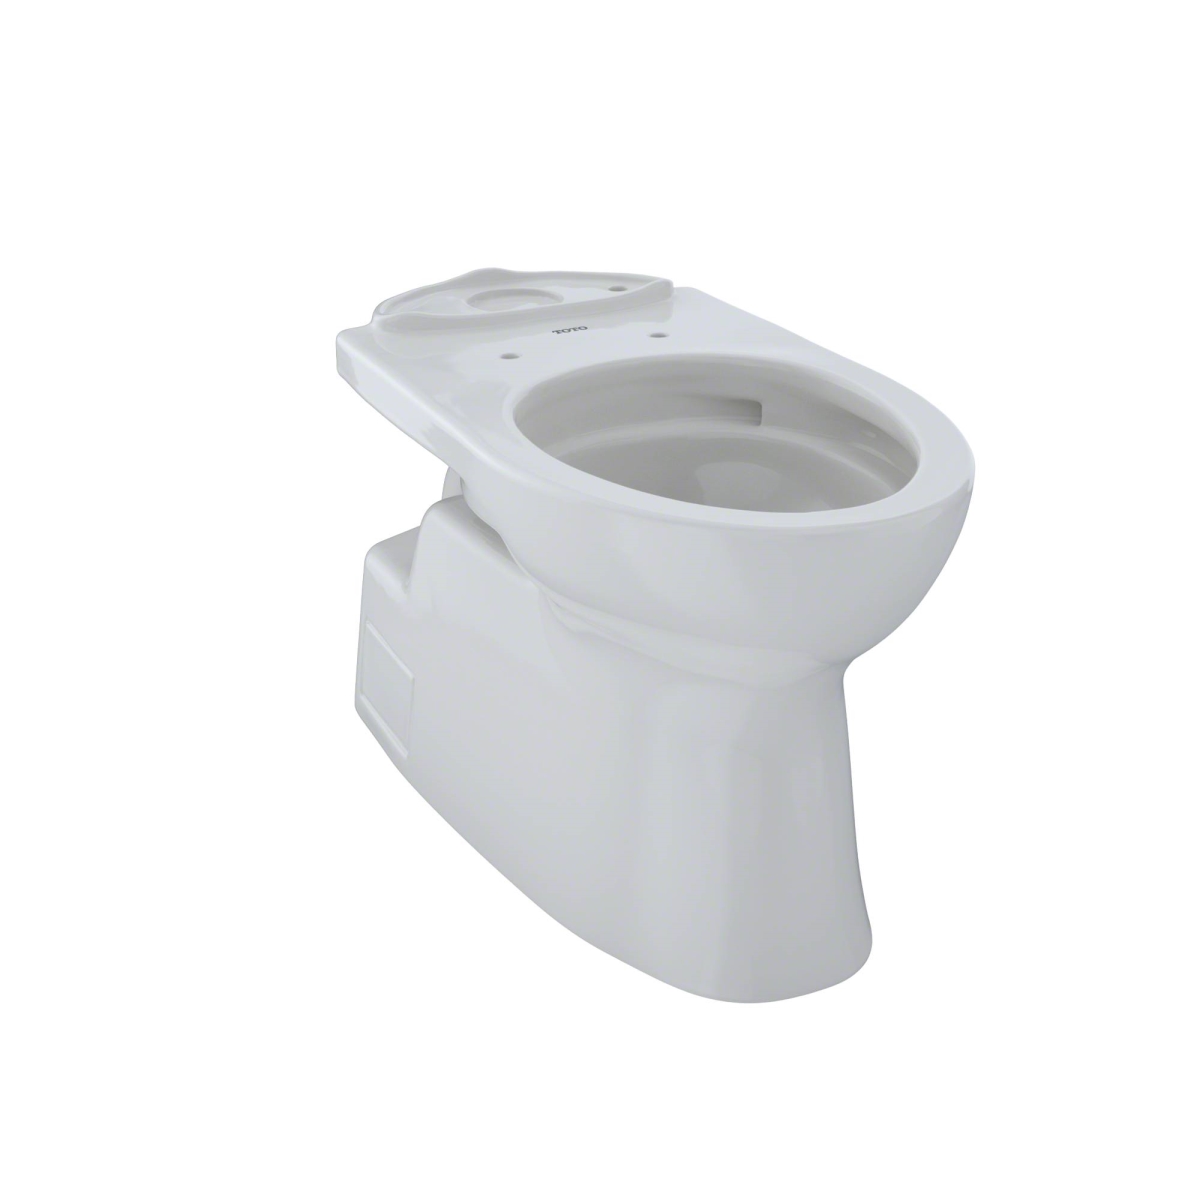 Ct474cufg-11 Vespin Ii Universal Height Elongated Skirted Toilet Bowl, Cotton White